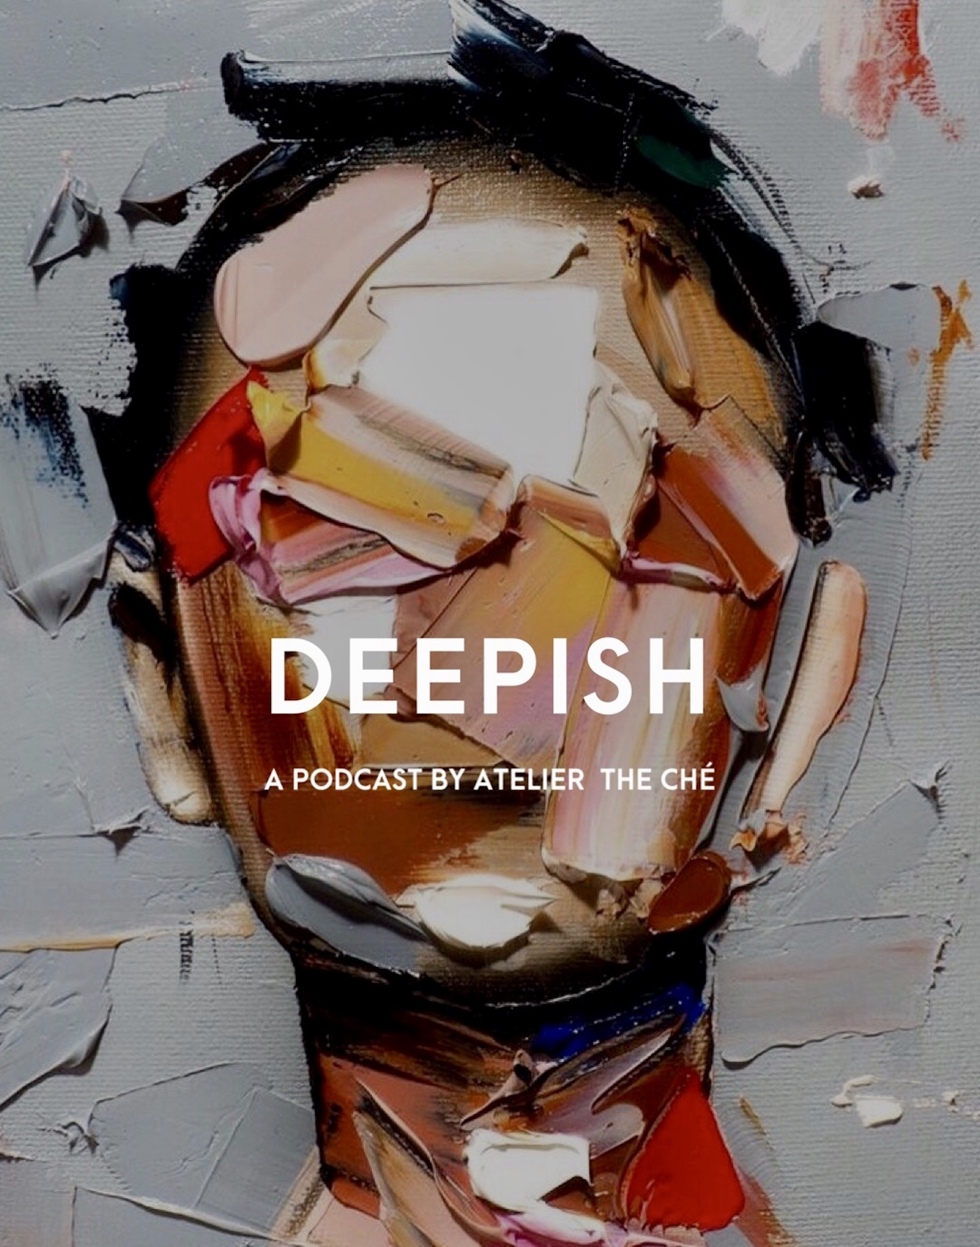 Deepish-Cover-podcast-atelier-the-che-by-sara-che